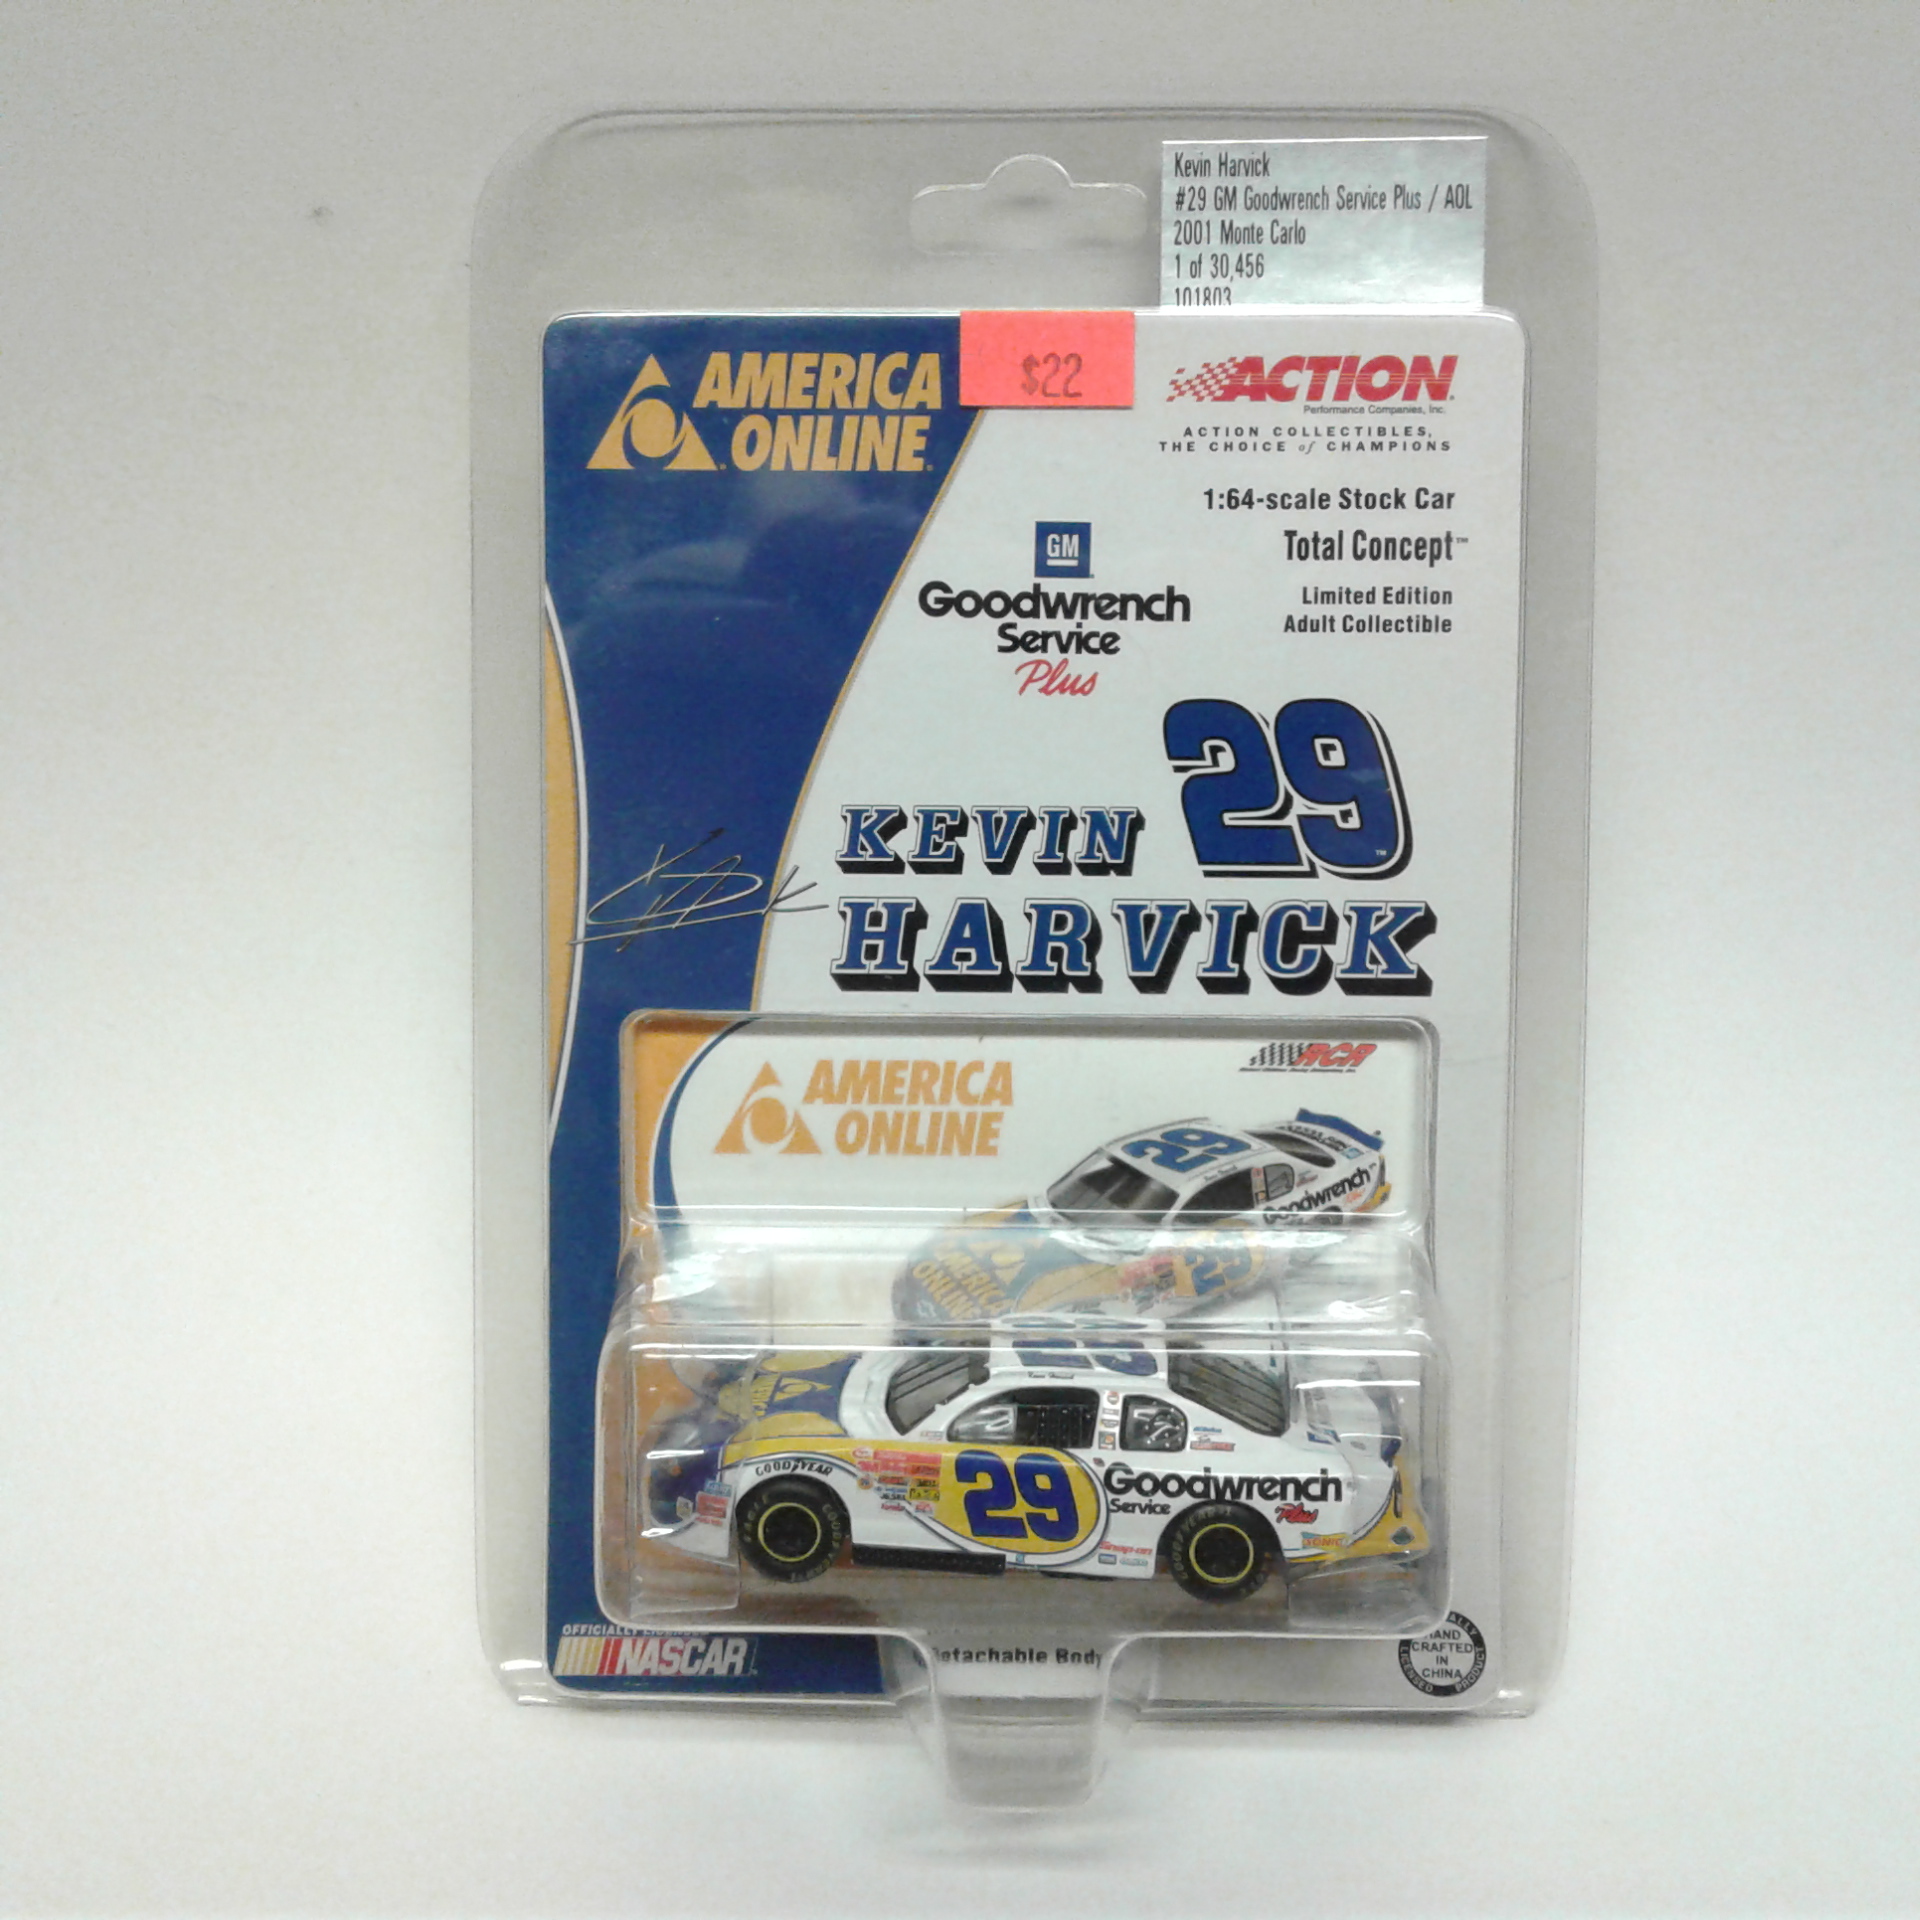 New Kevin Harvick #29 Goodwrench Indianapolis  1:64 Ltd Ed P/N 109811 